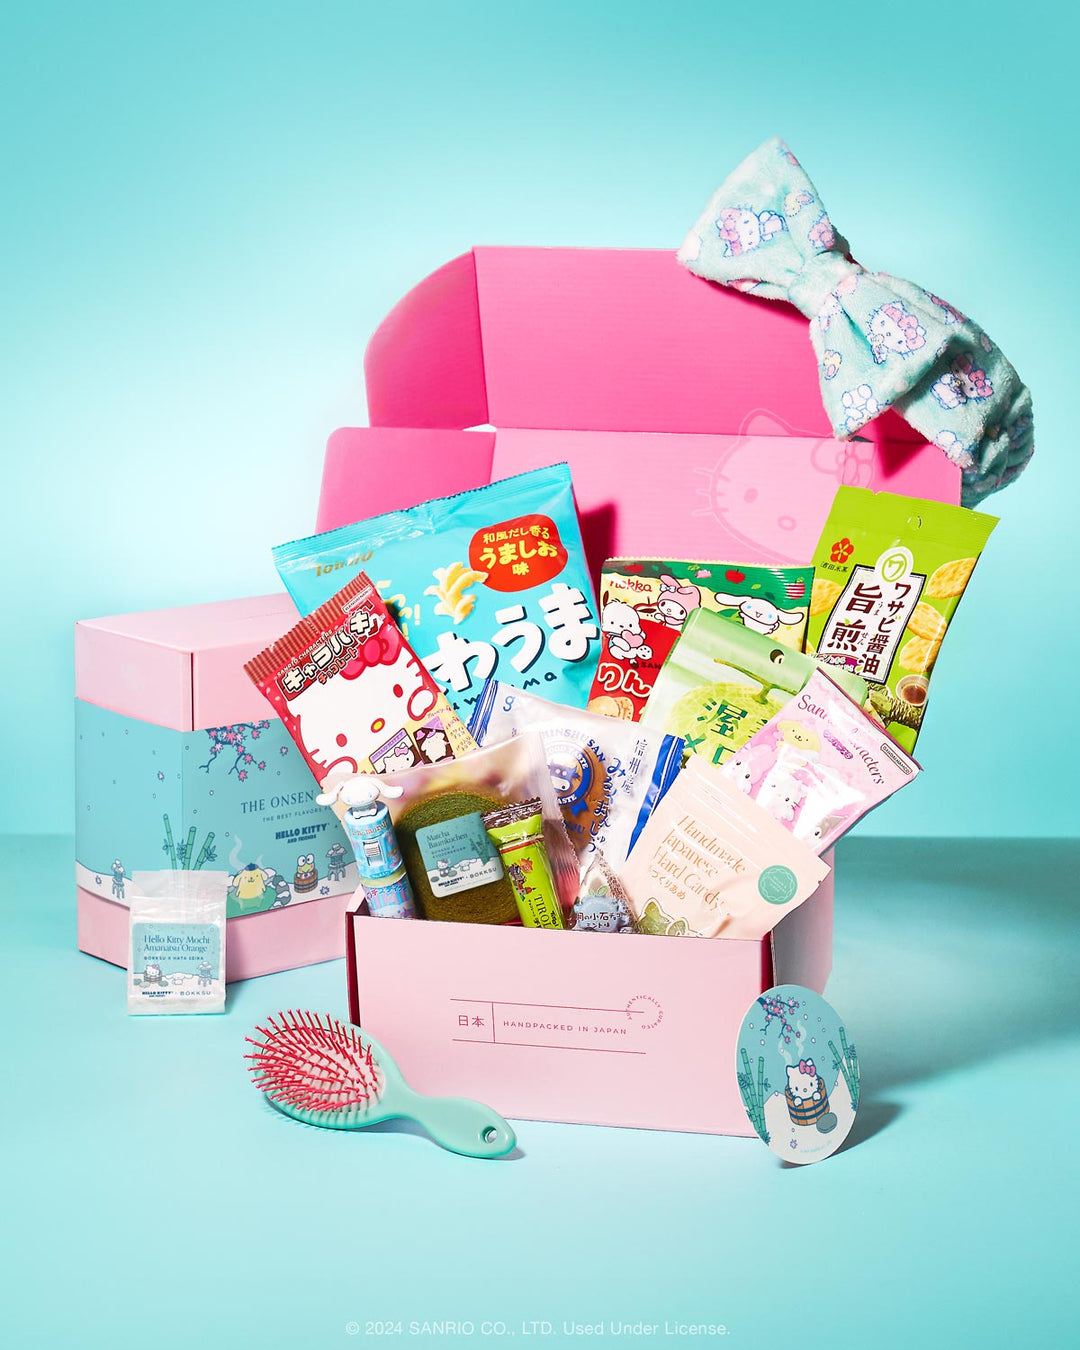 February'24 Bokksu Hello Kitty® and Friends Snack Box: Onsen Afternoon